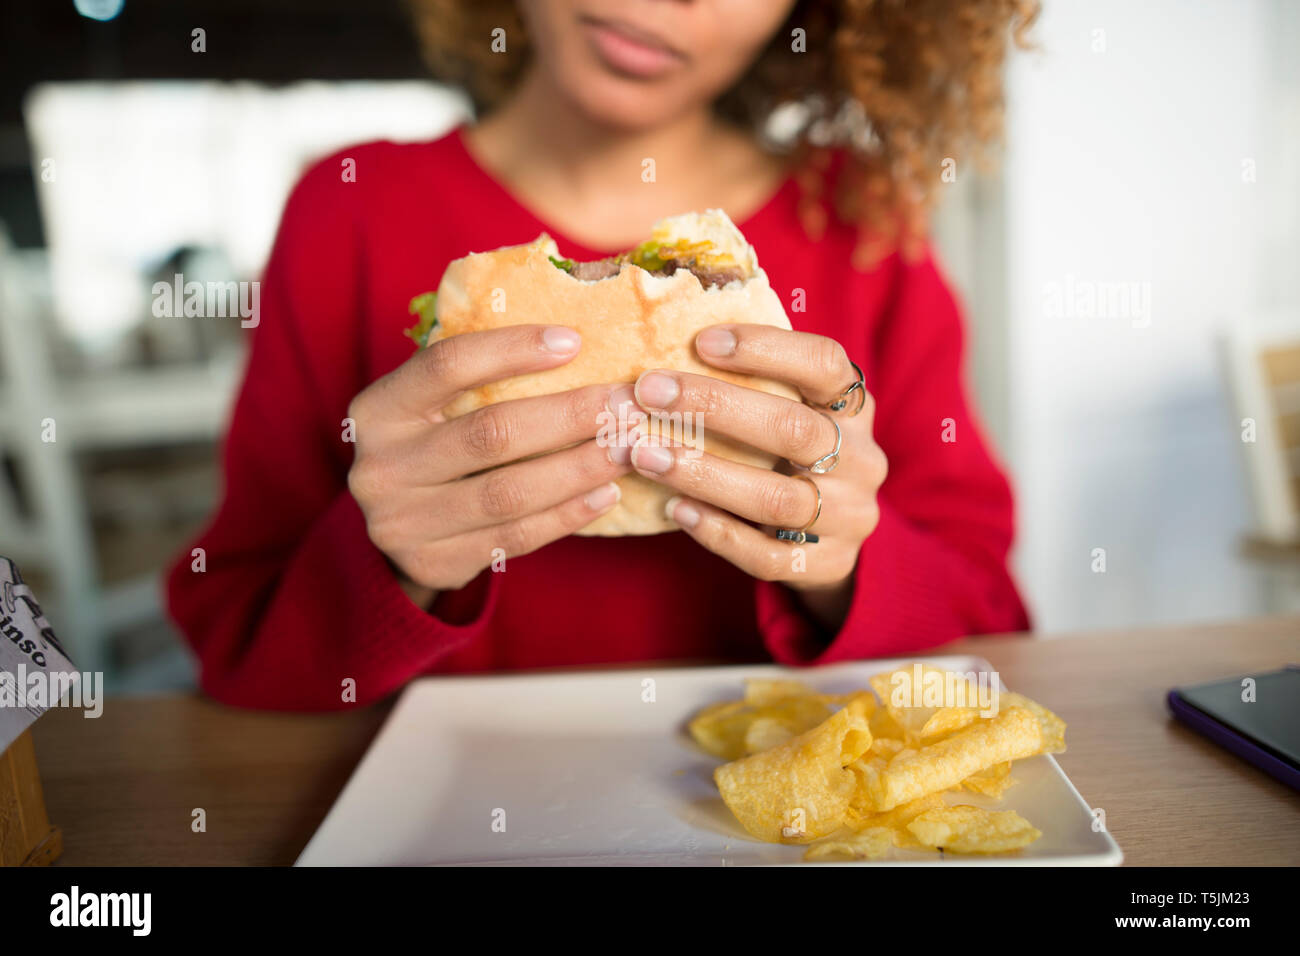 Close-up of woman's hands holding a hamburger Stock Photo